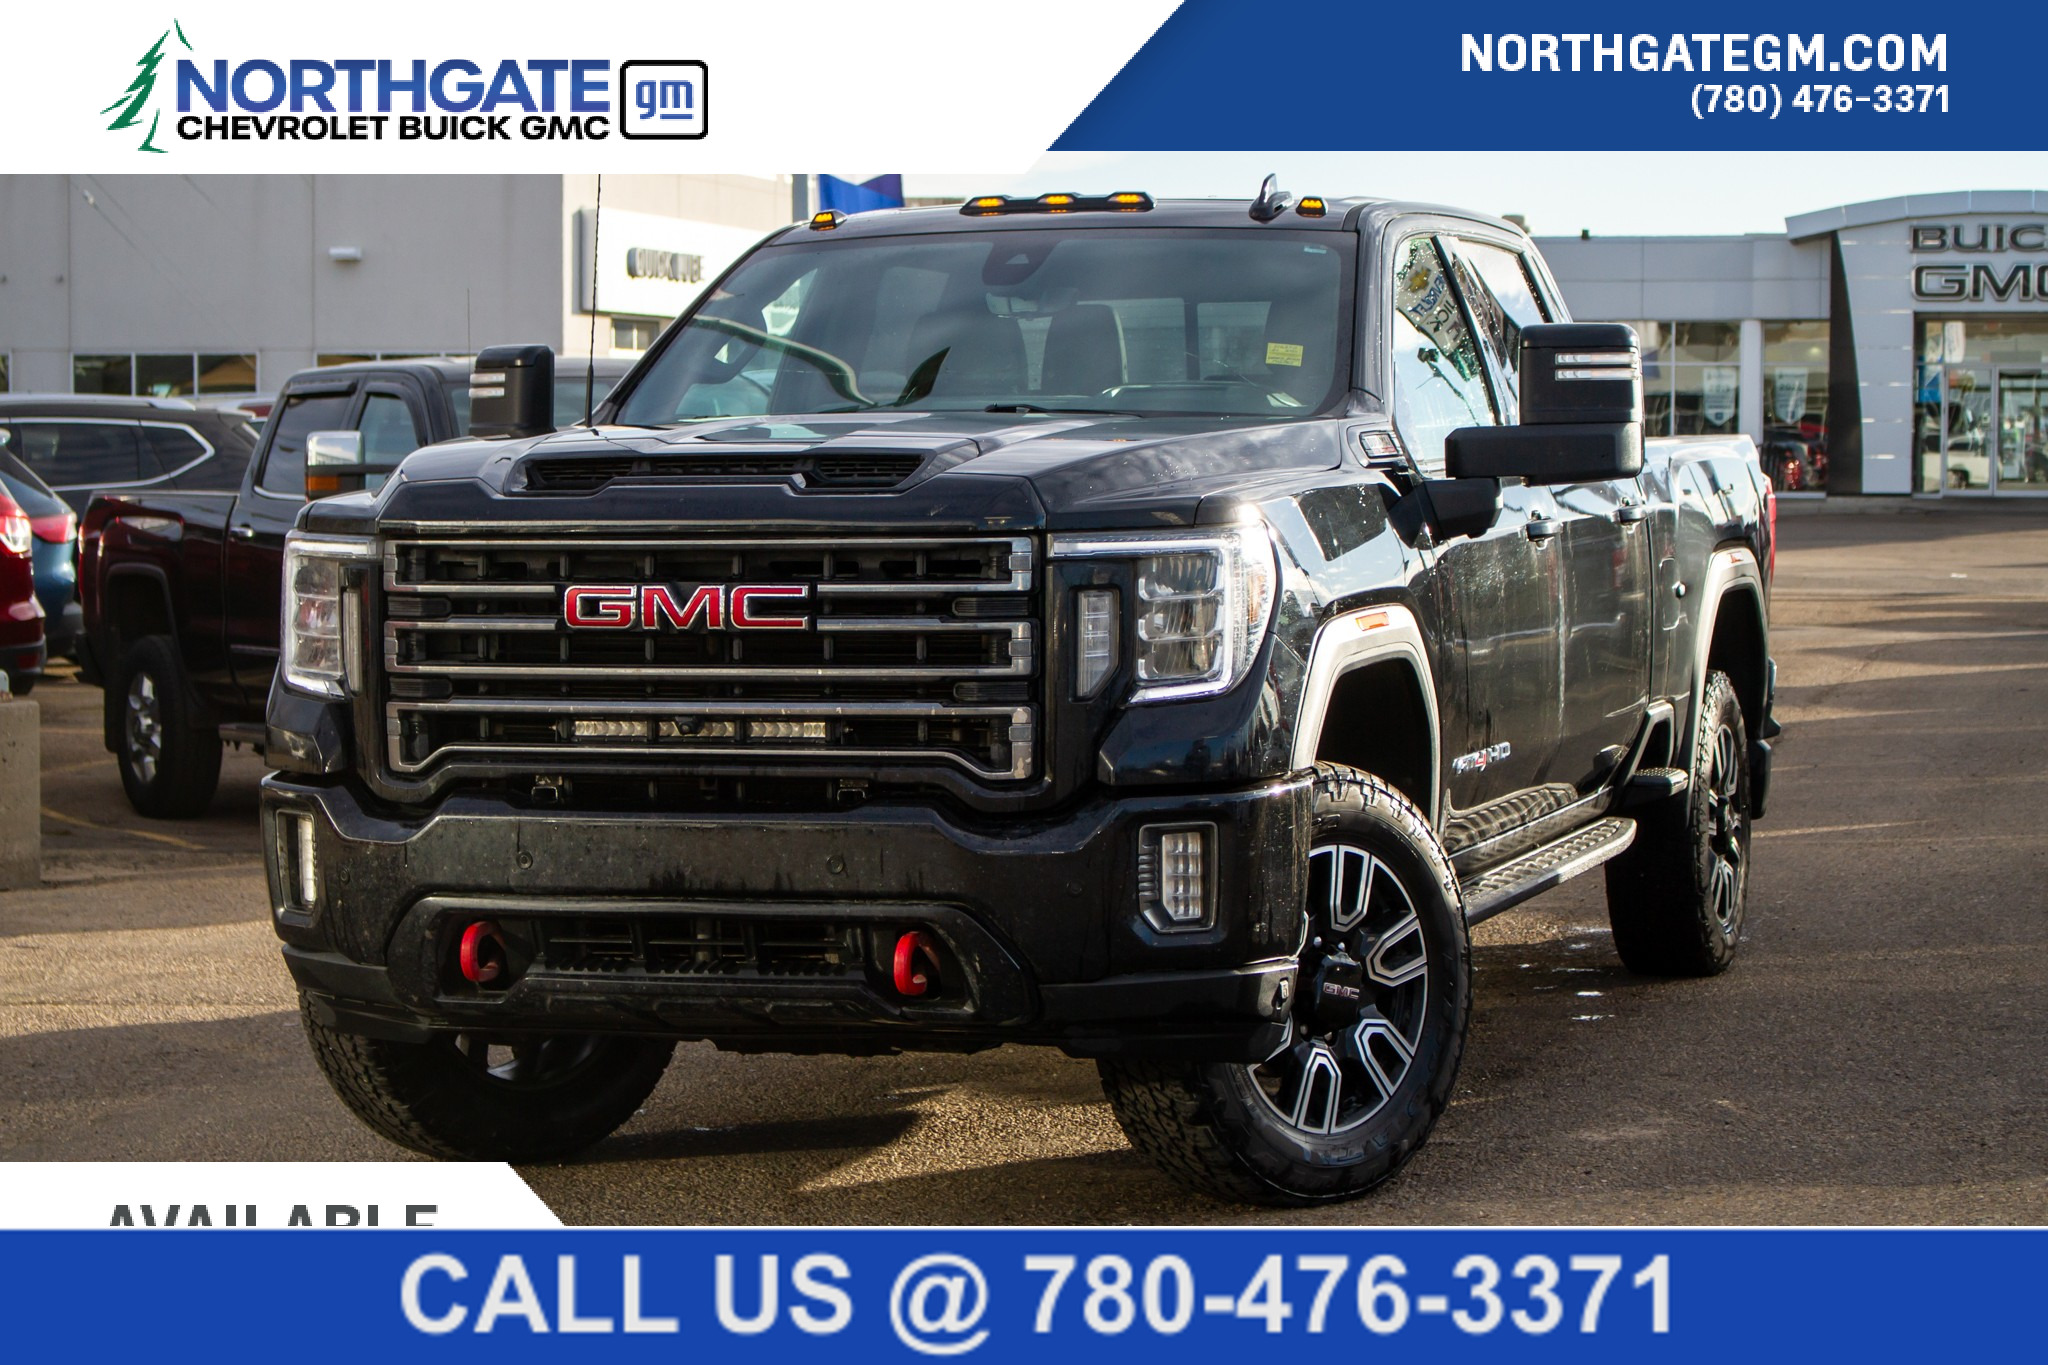 2021 GMC Sierra 3500HD AT4 MORE PICTURES SOON, AWAITING RECONDITIONING | 